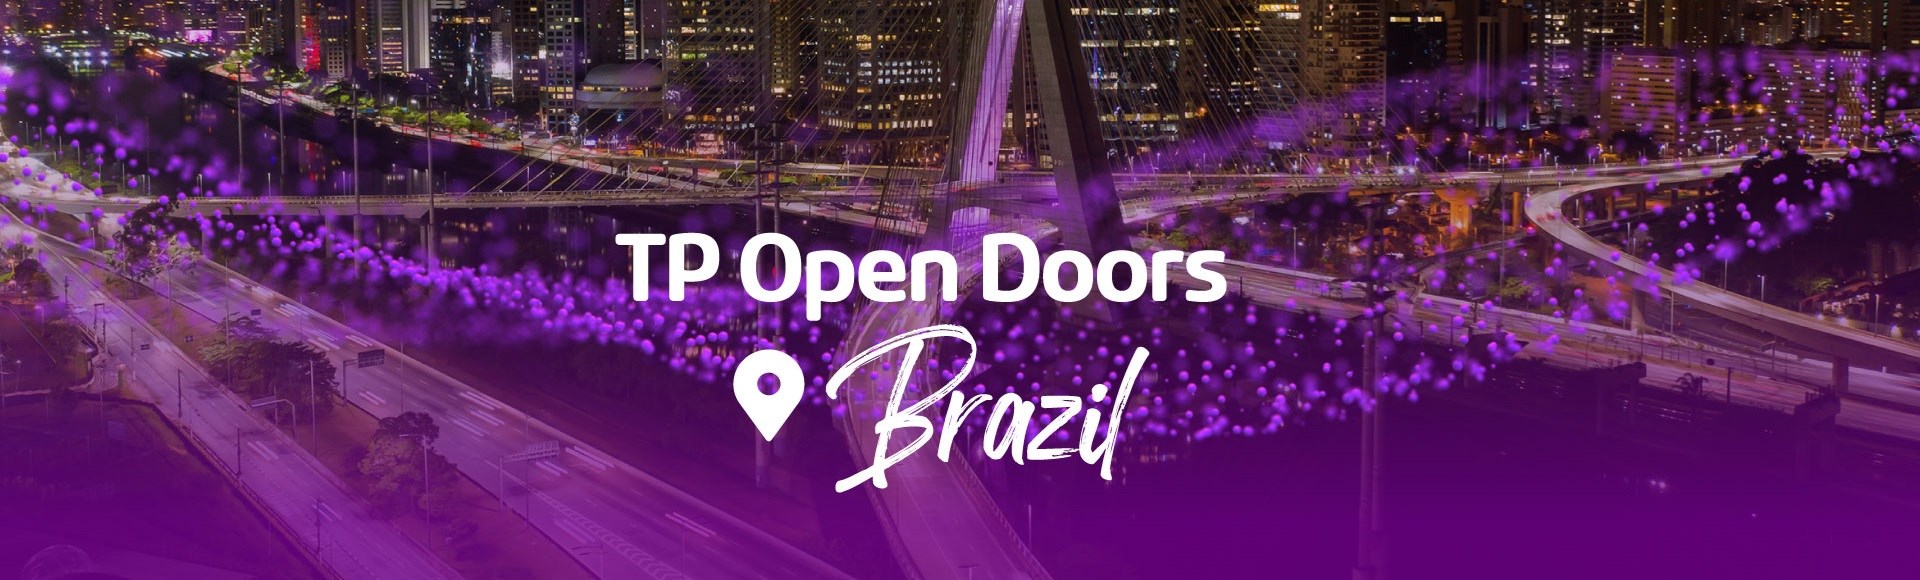 “TP Open Doors” Welcomes You to Brazil